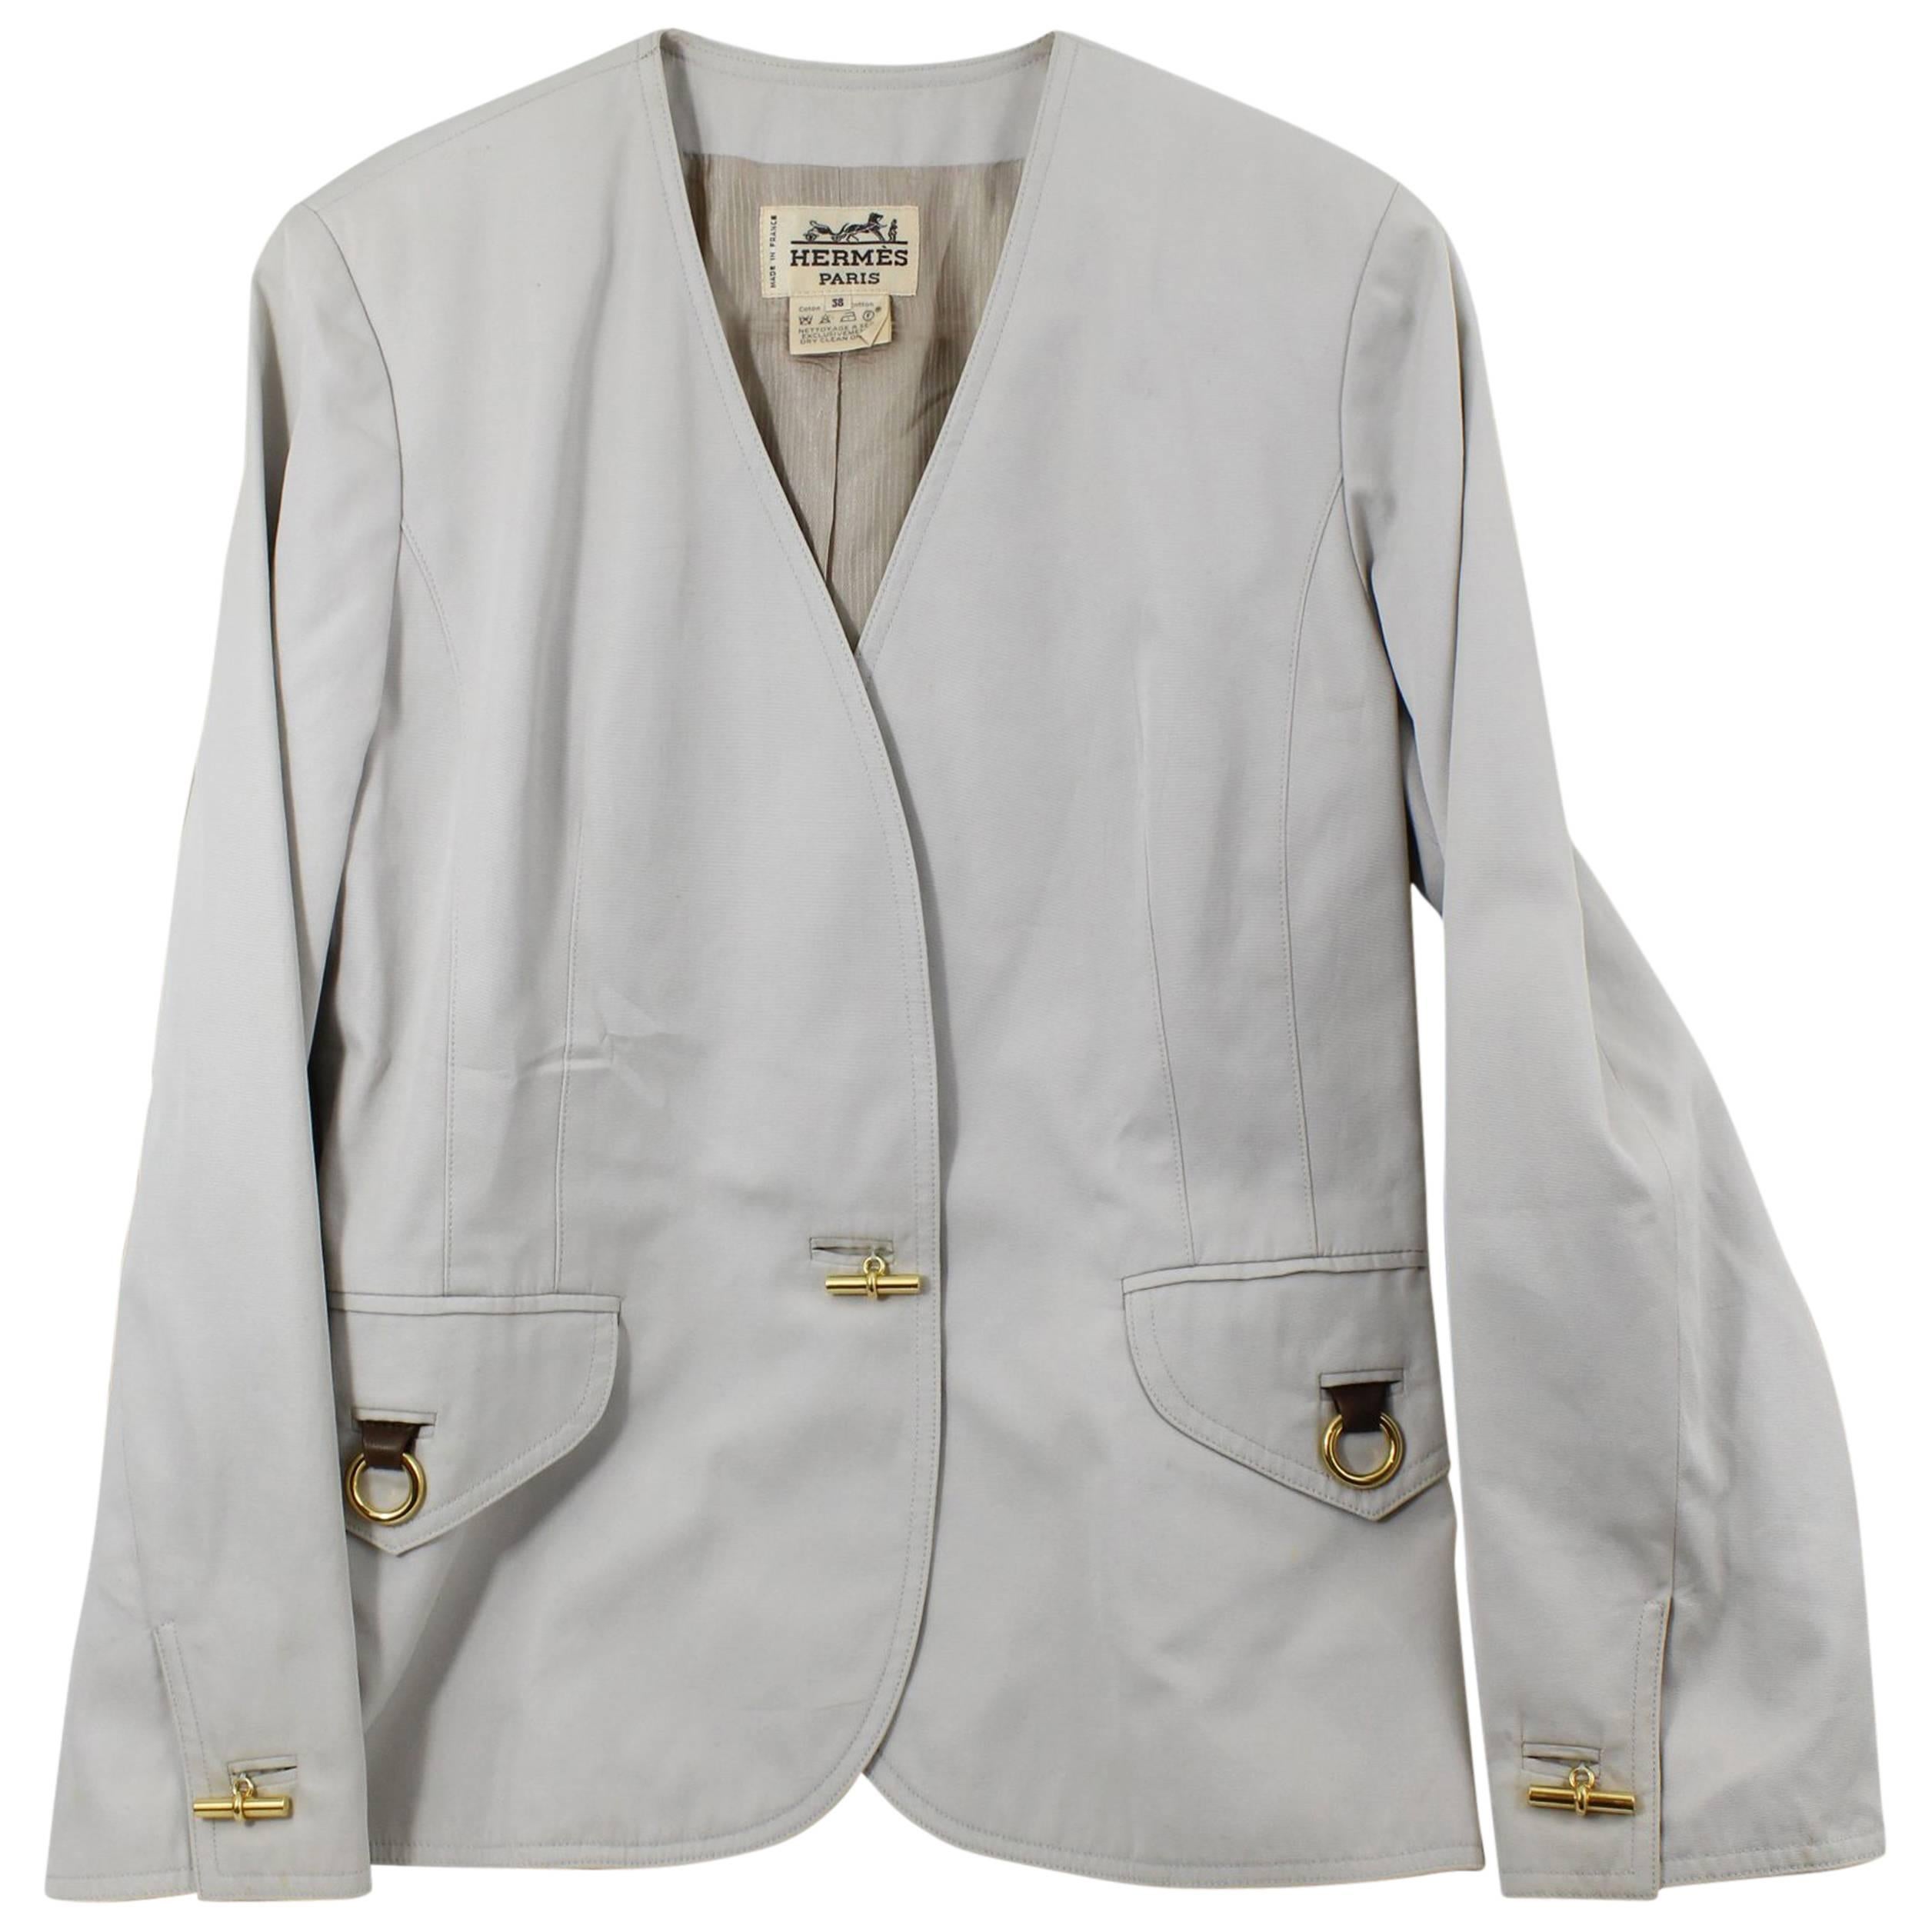 Vintage Hermes Blazer in Cotton with Chaine D'ancre Buttons Size Fr 38